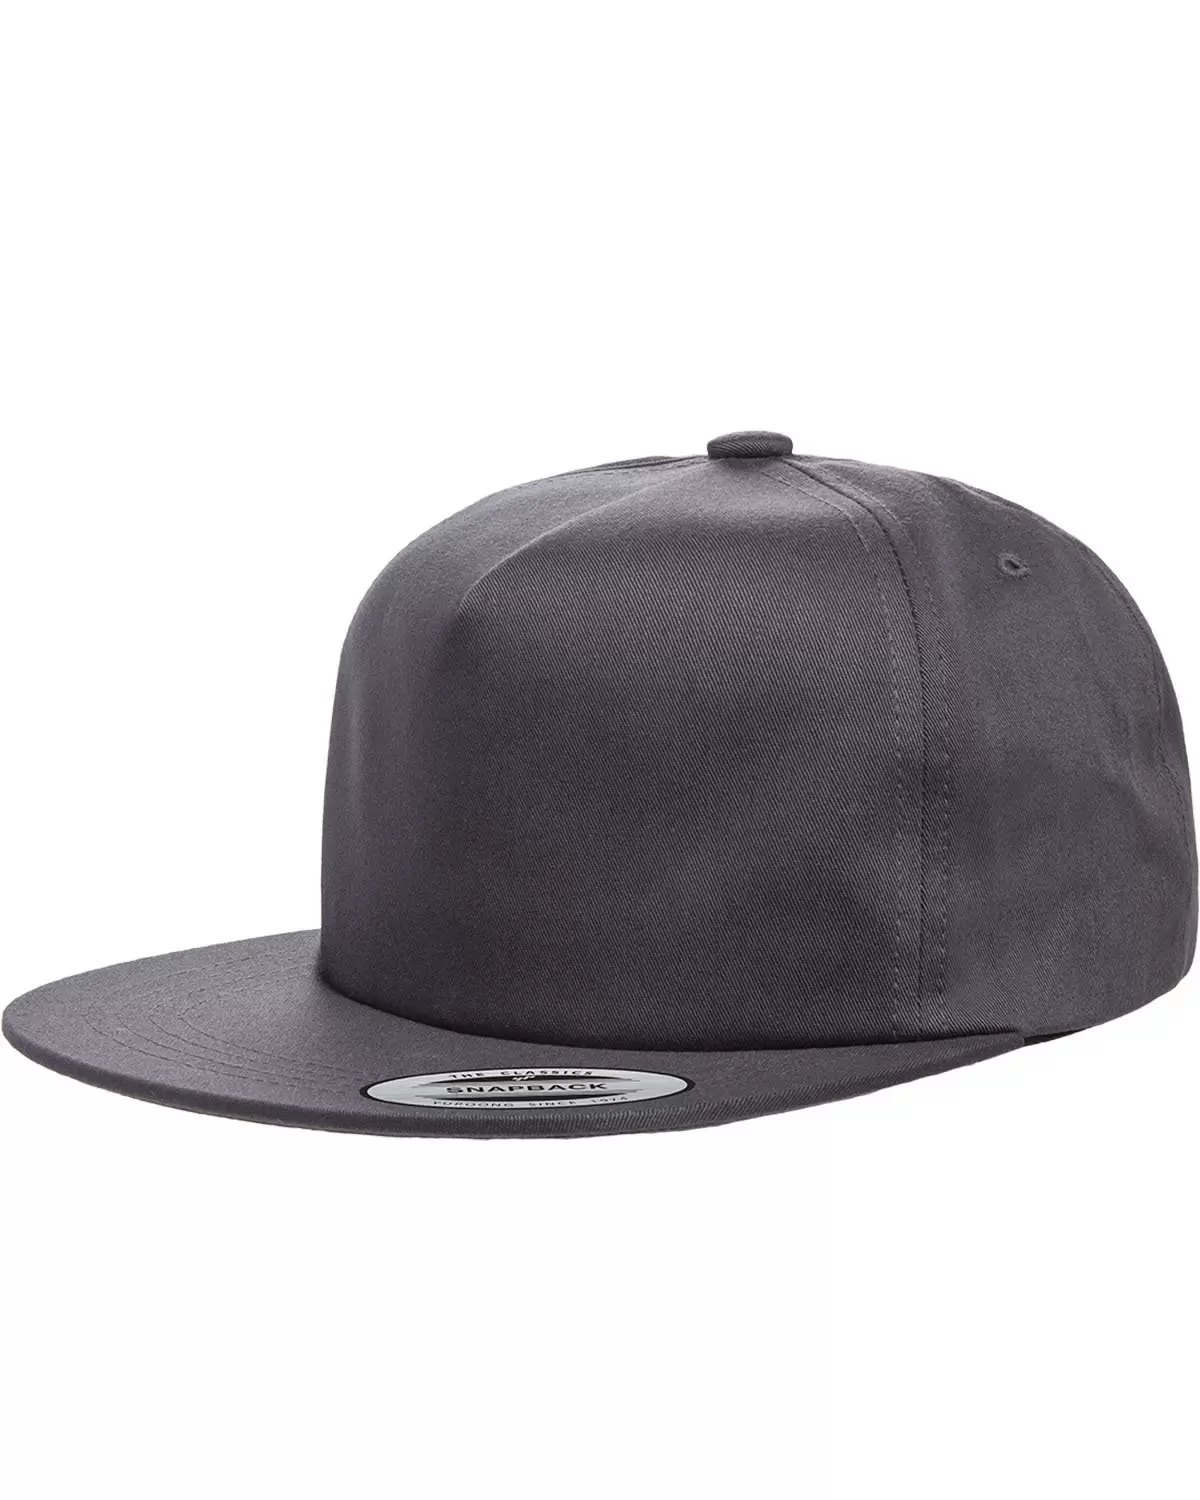 Yupoong-Flex Fit 6502 Unstructured Five-Panel Snapback Cap - From